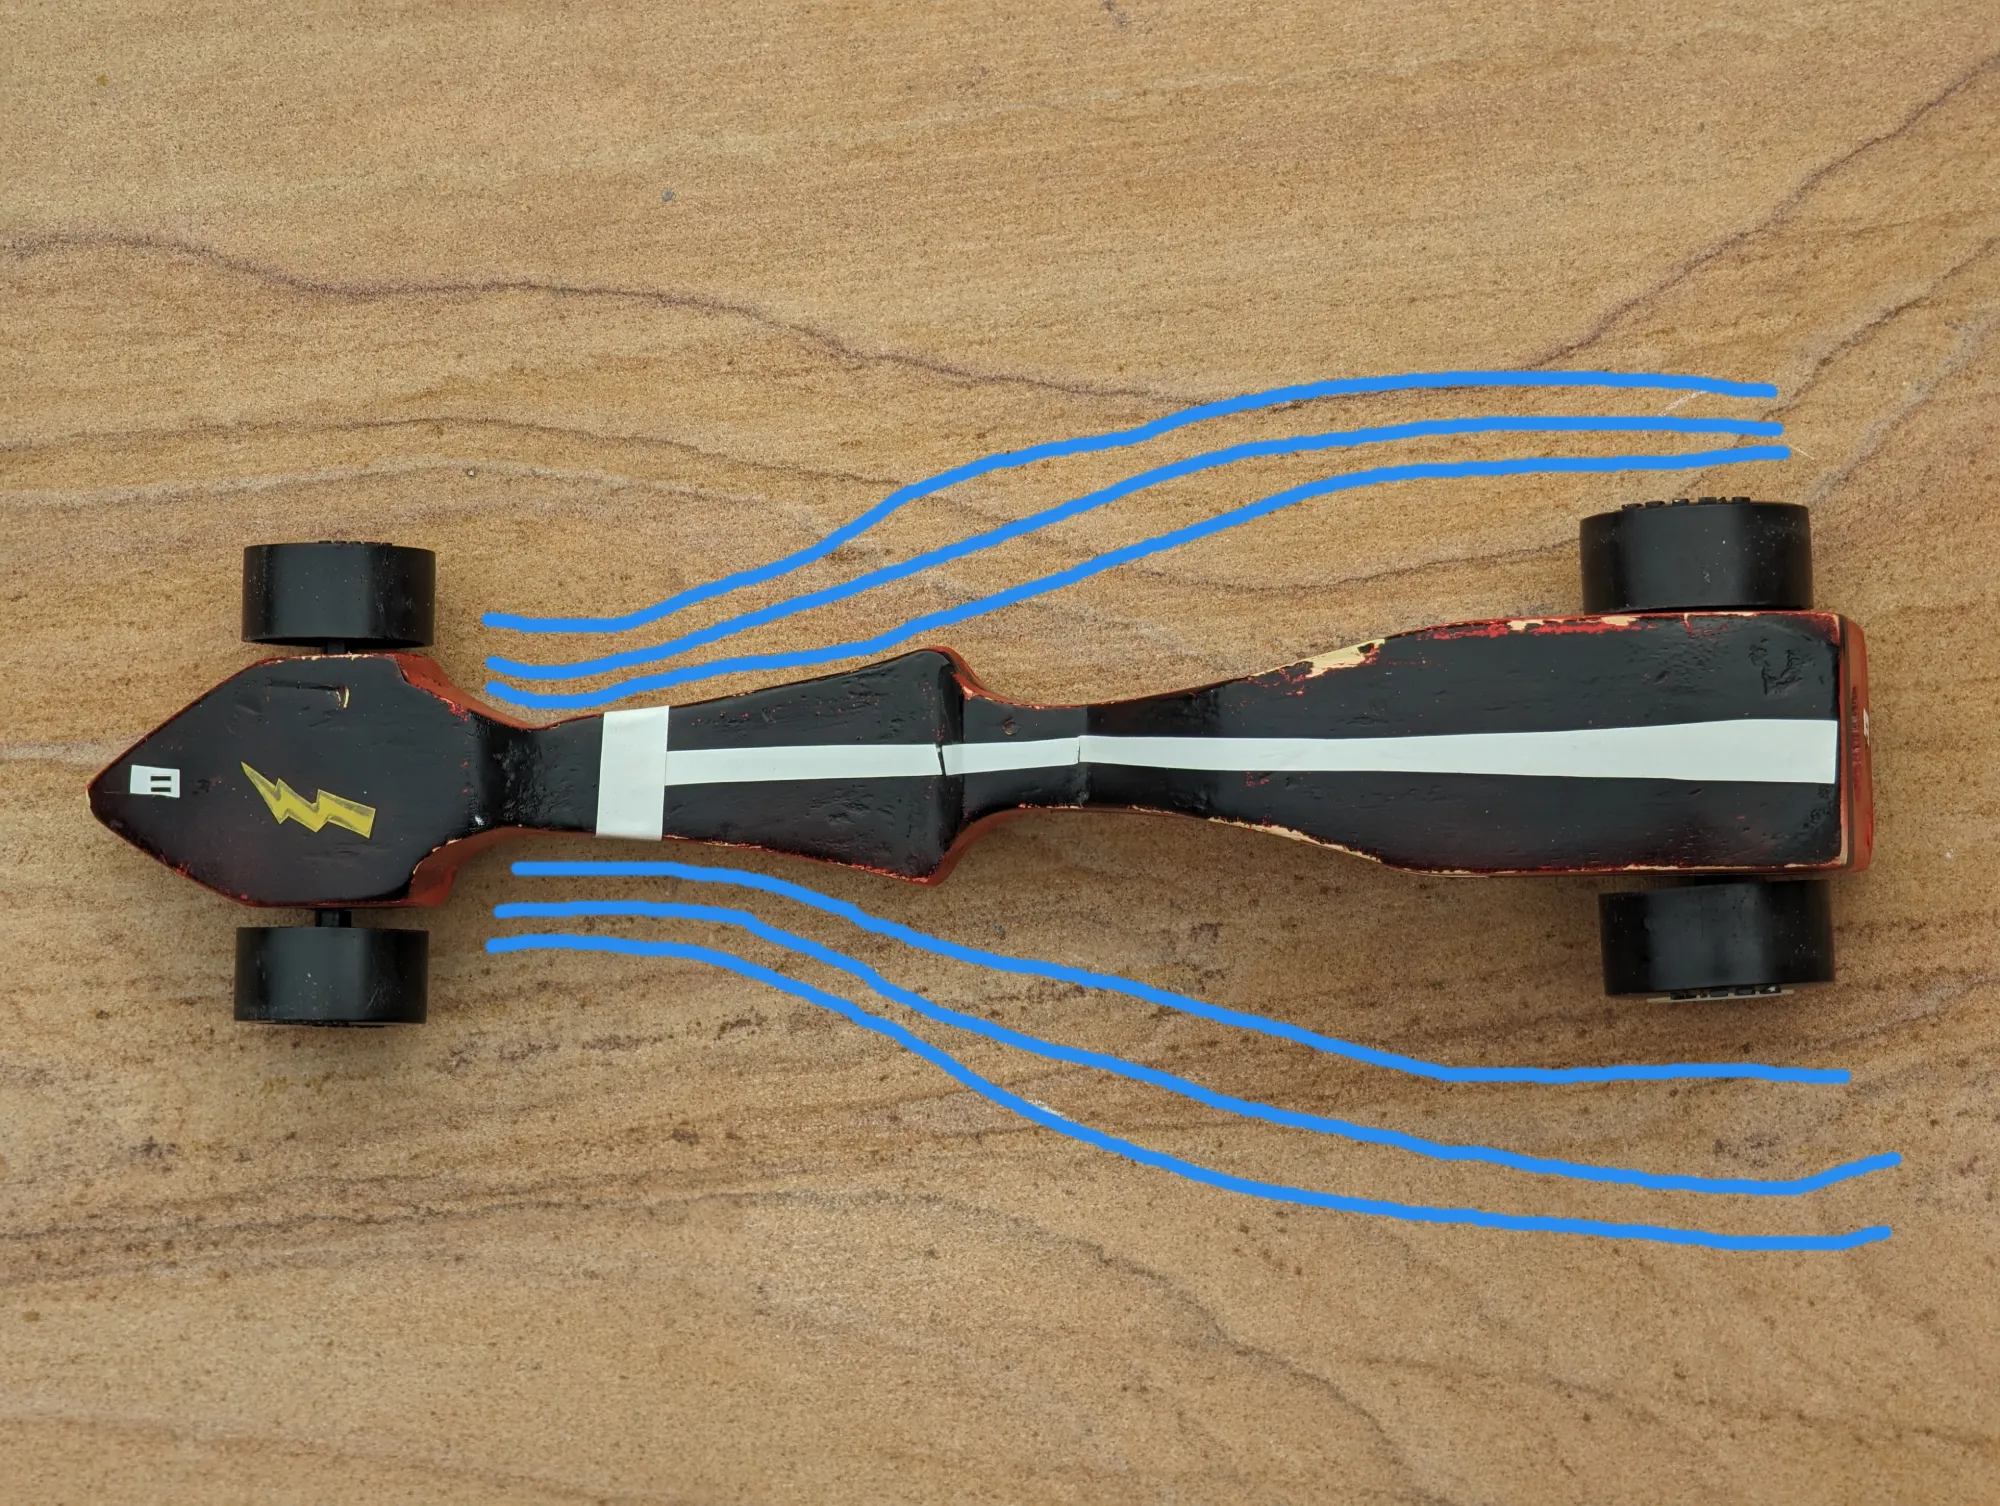 top-down image of a black-painted wooden car with blue lines showing anticipated airflow.